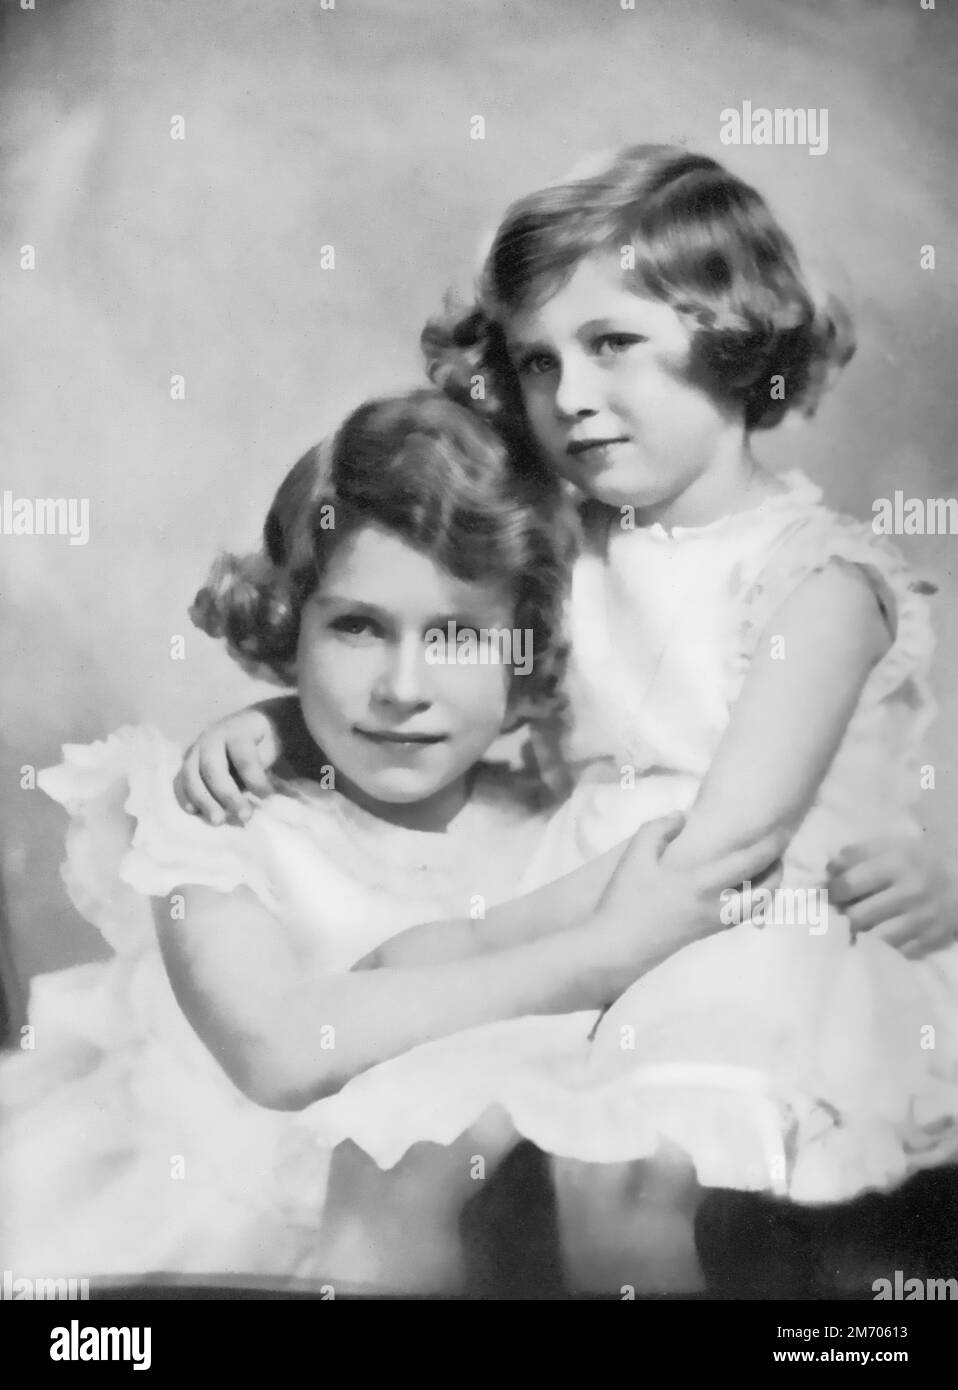 Princesses Elizabeth and Margaret, c1937. Princess Elizabeth, later Queen Elizabeth II (1926-2022) and Princess Margaret, later Princess Margaret, Countess of Snowdon (1930-2002), photographed aged approximately 11 and 7 years old. Stock Photo